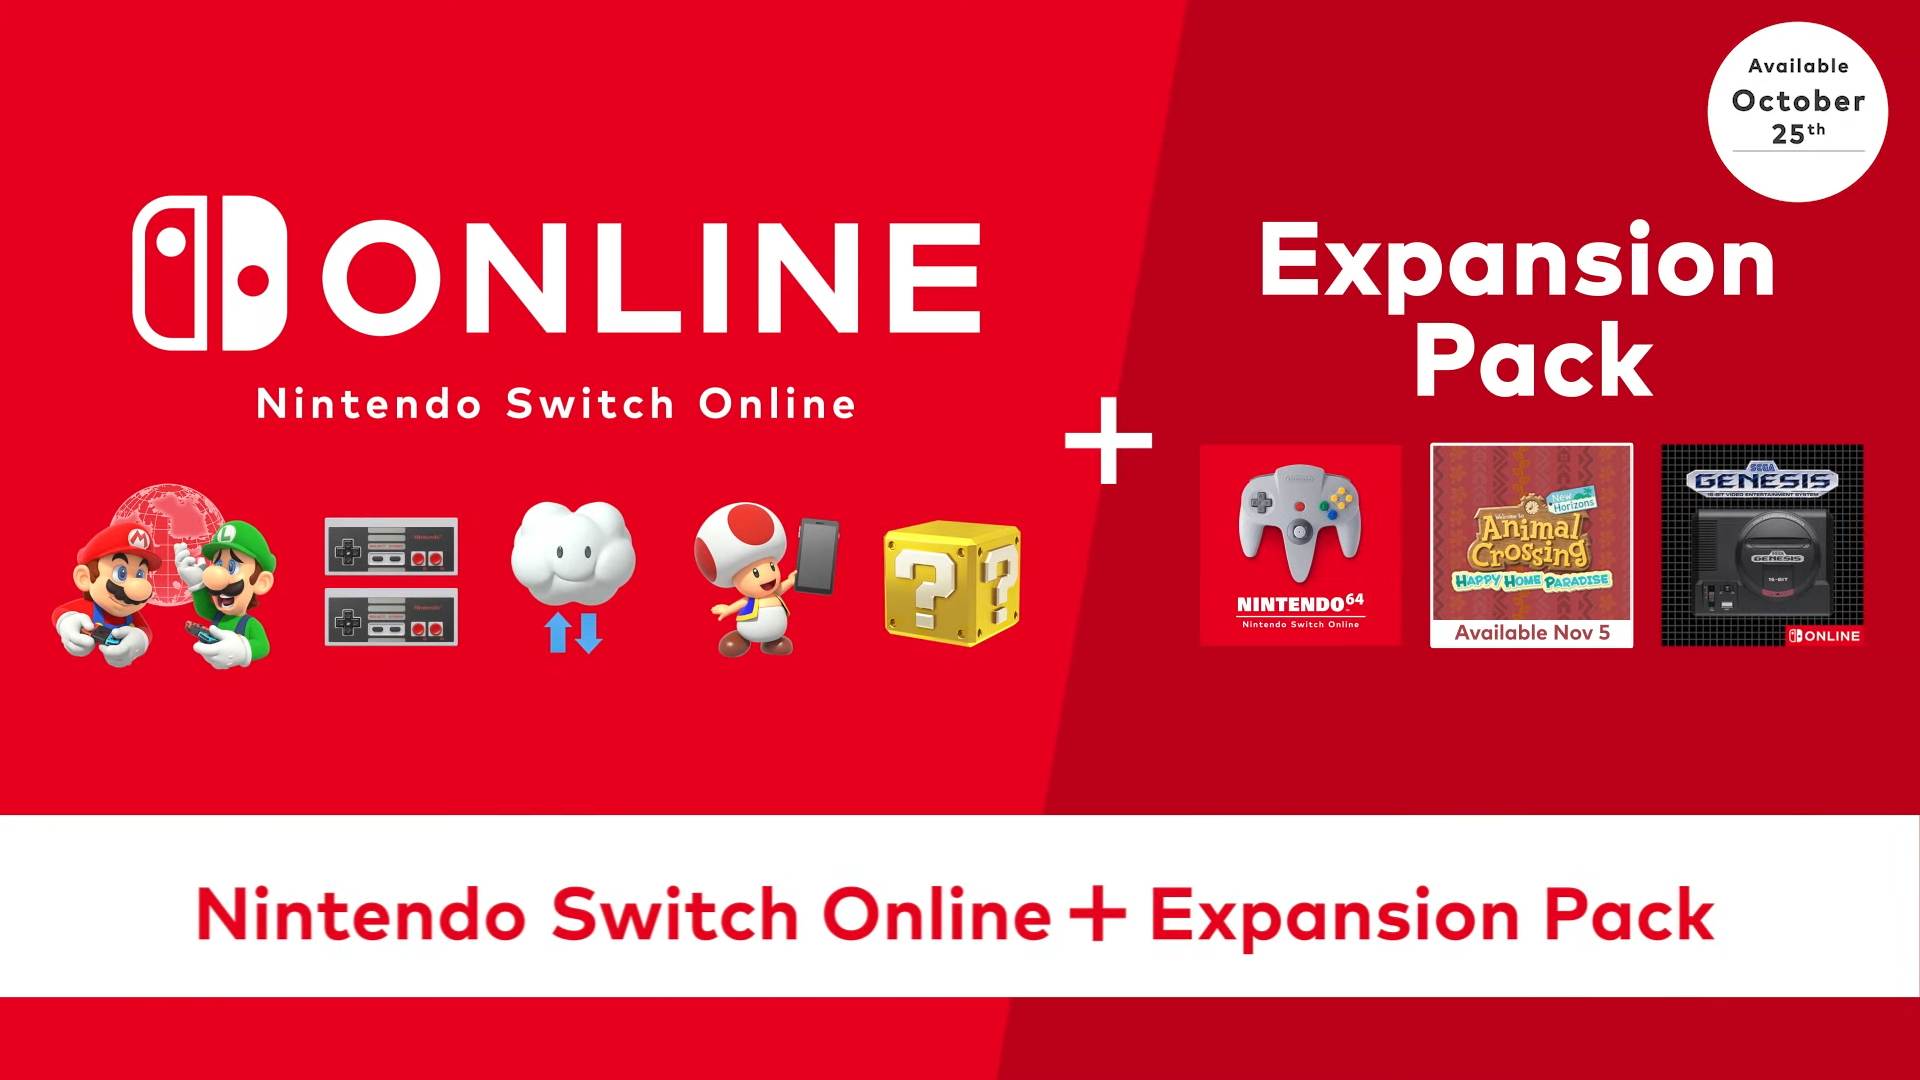 Nintendo Switch Online Expansion Pack pricing